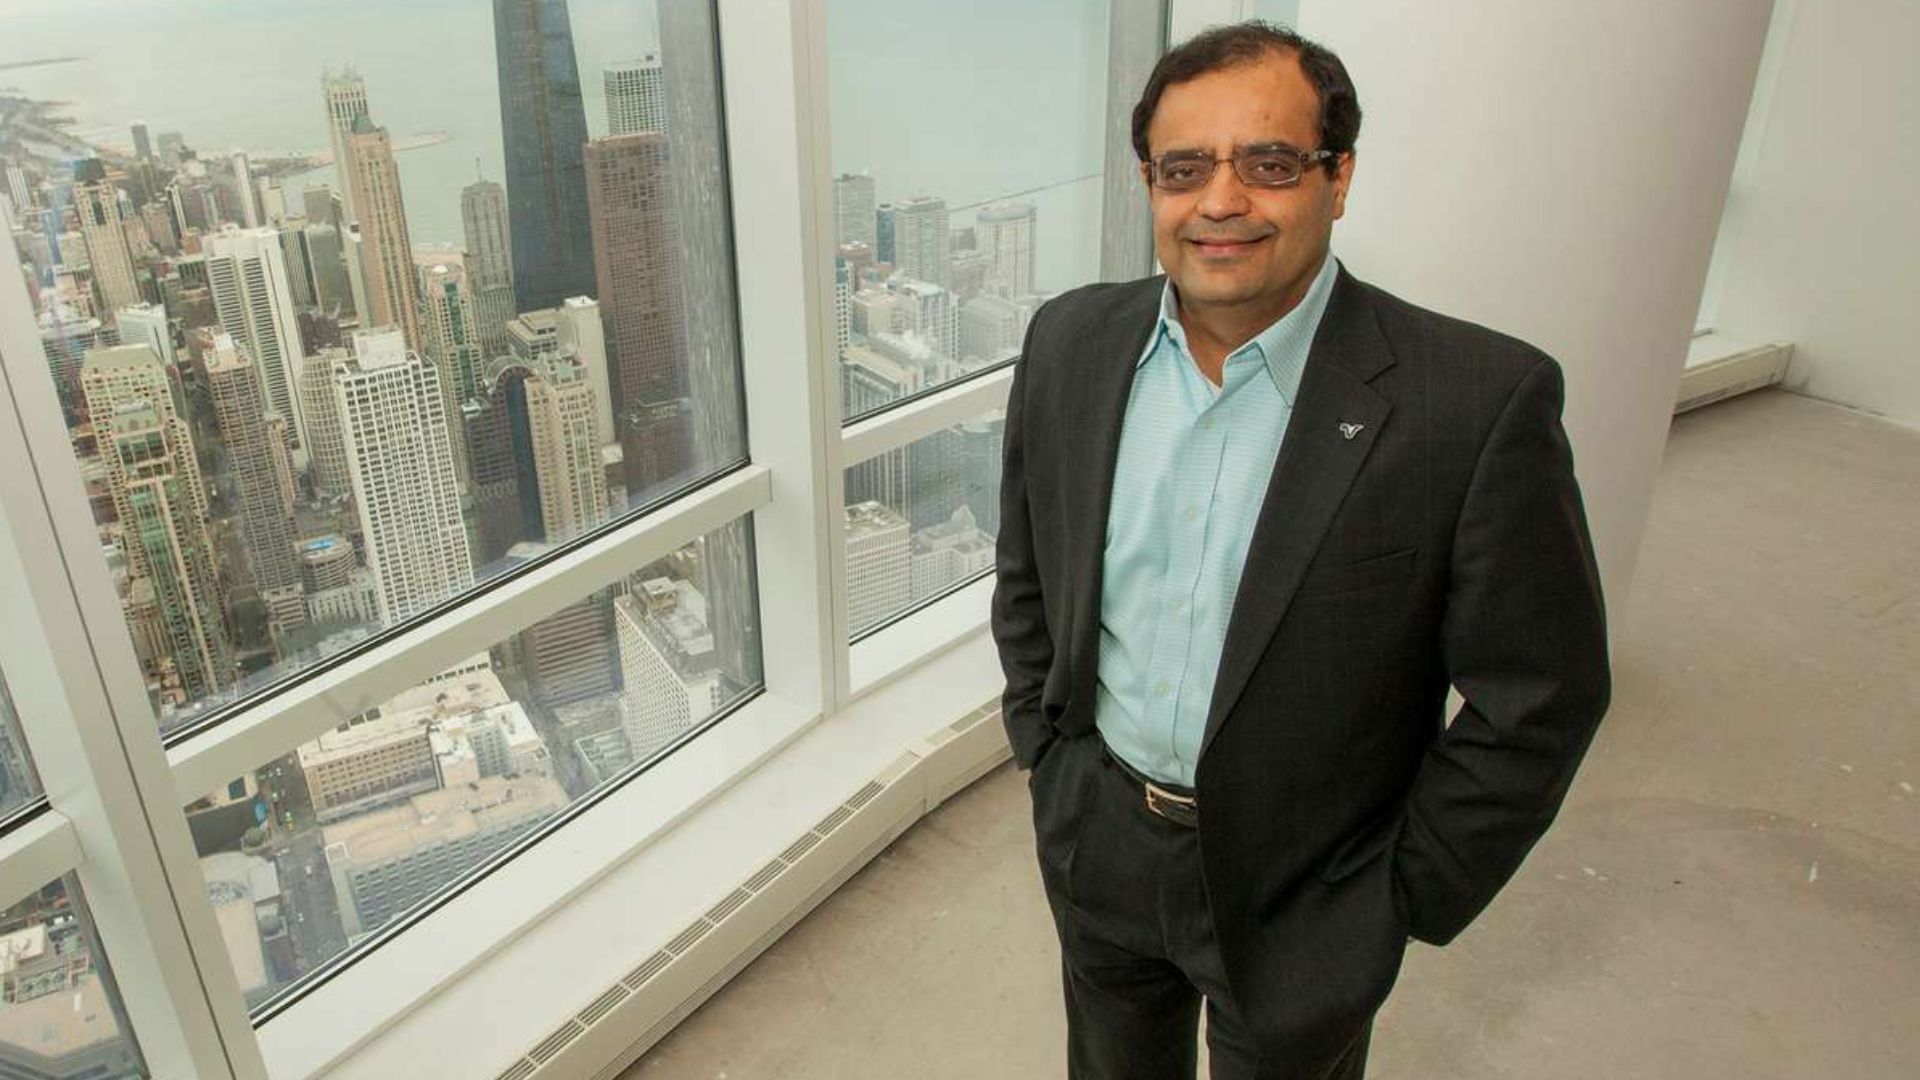 Vistex CEO Sanjay Shah dies at anniversary celebration after on-stage mishap